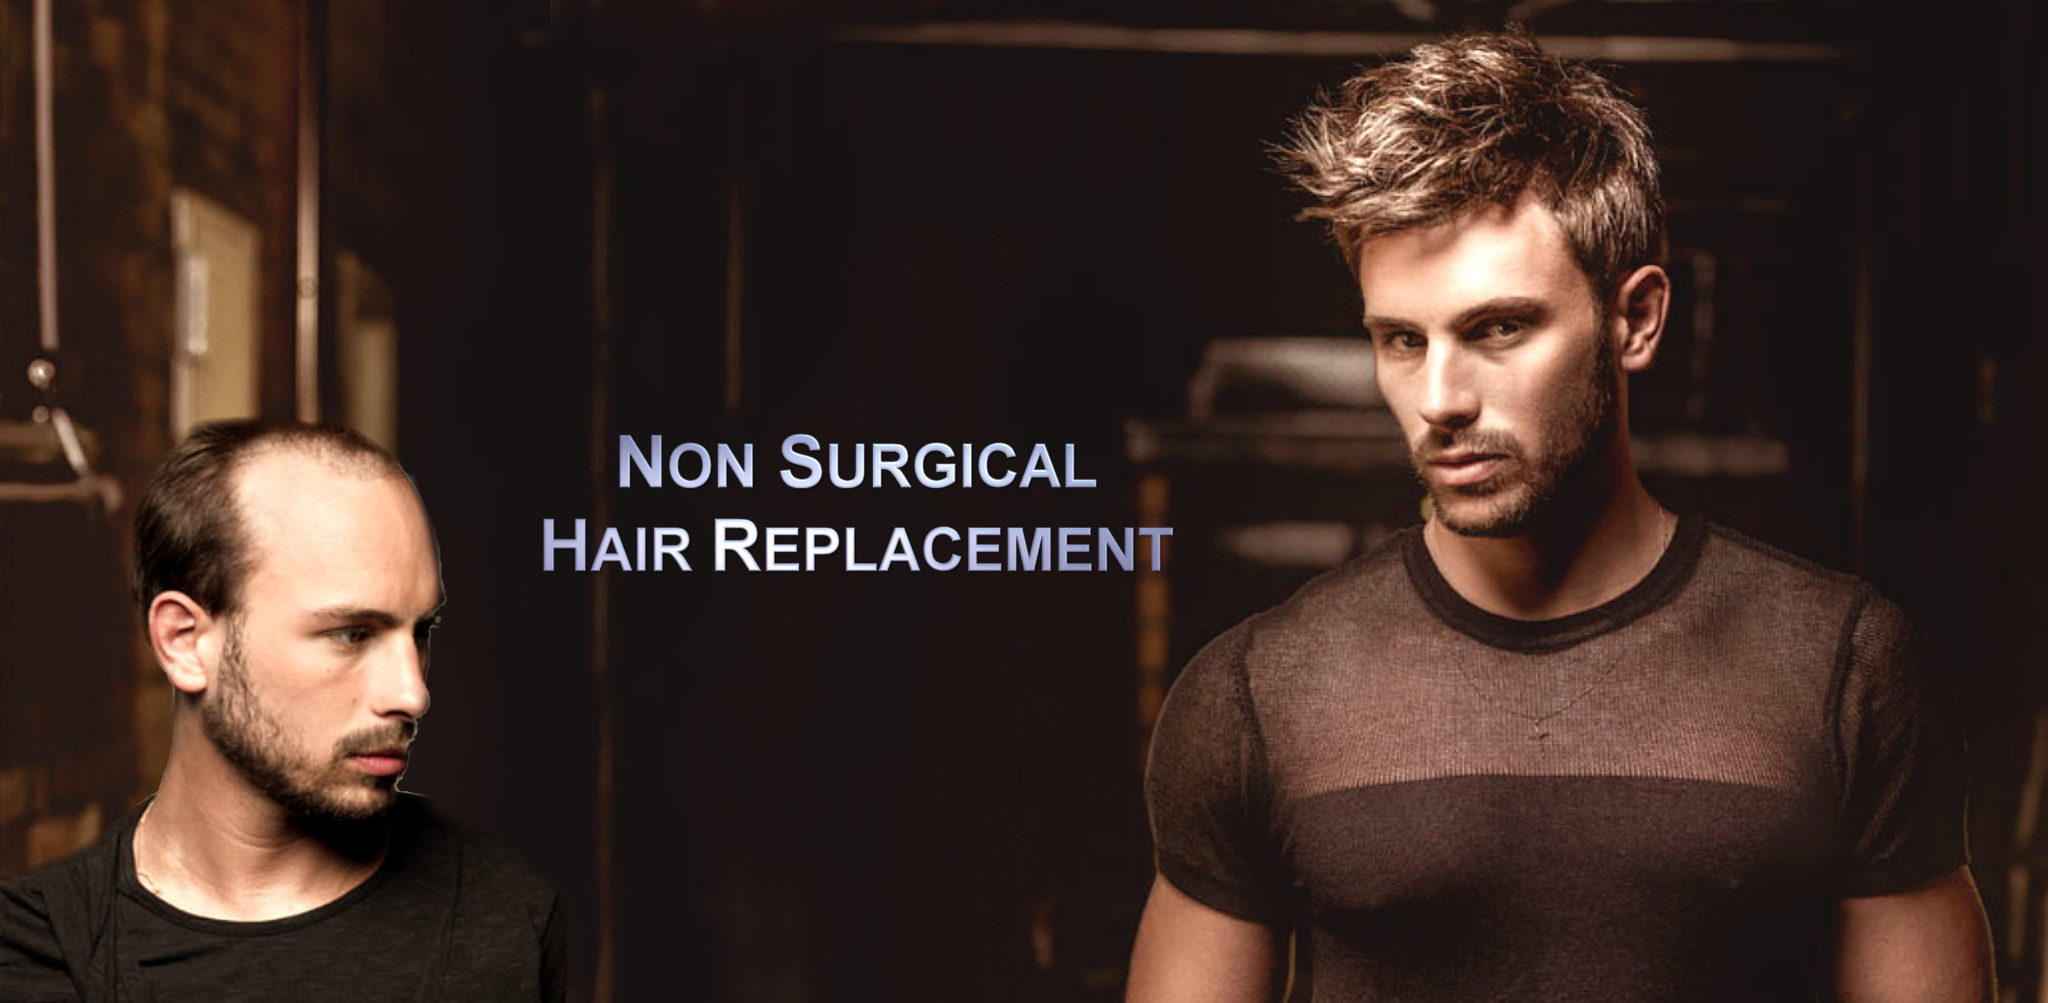 Non Surgical Hair Transplant For Men At The Hair Clinic Montreal 